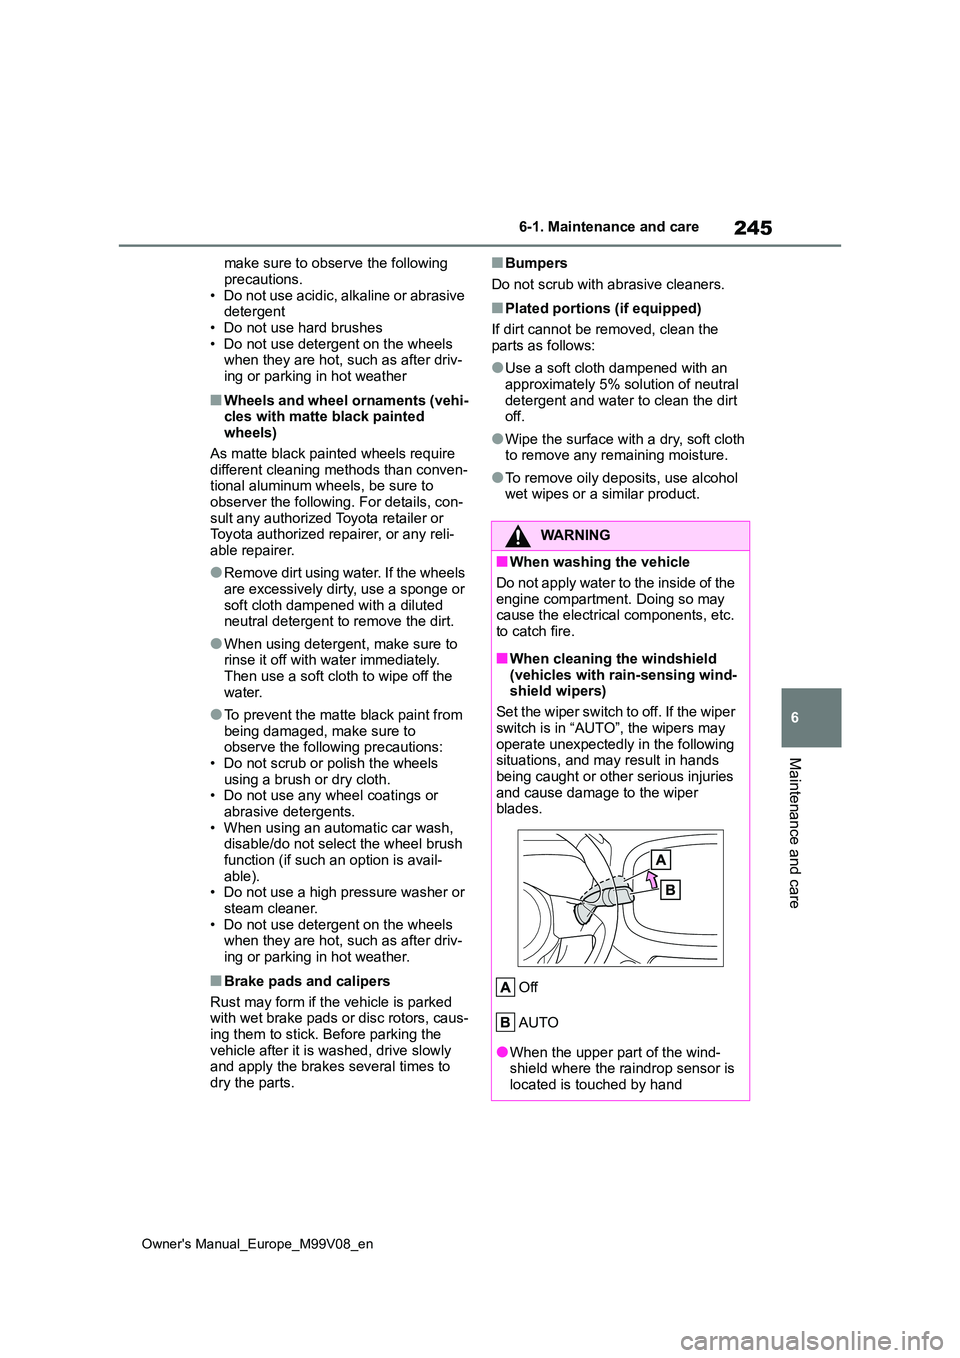 TOYOTA AYGO X 2022  Owners Manual (in English) 245
6
Owner's Manual_Europe_M99V08_en
6-1. Maintenance and care
Maintenance and care
make sure to observe the following  
precautions. • Do not use acidic, alkaline or abrasive detergent 
• Do